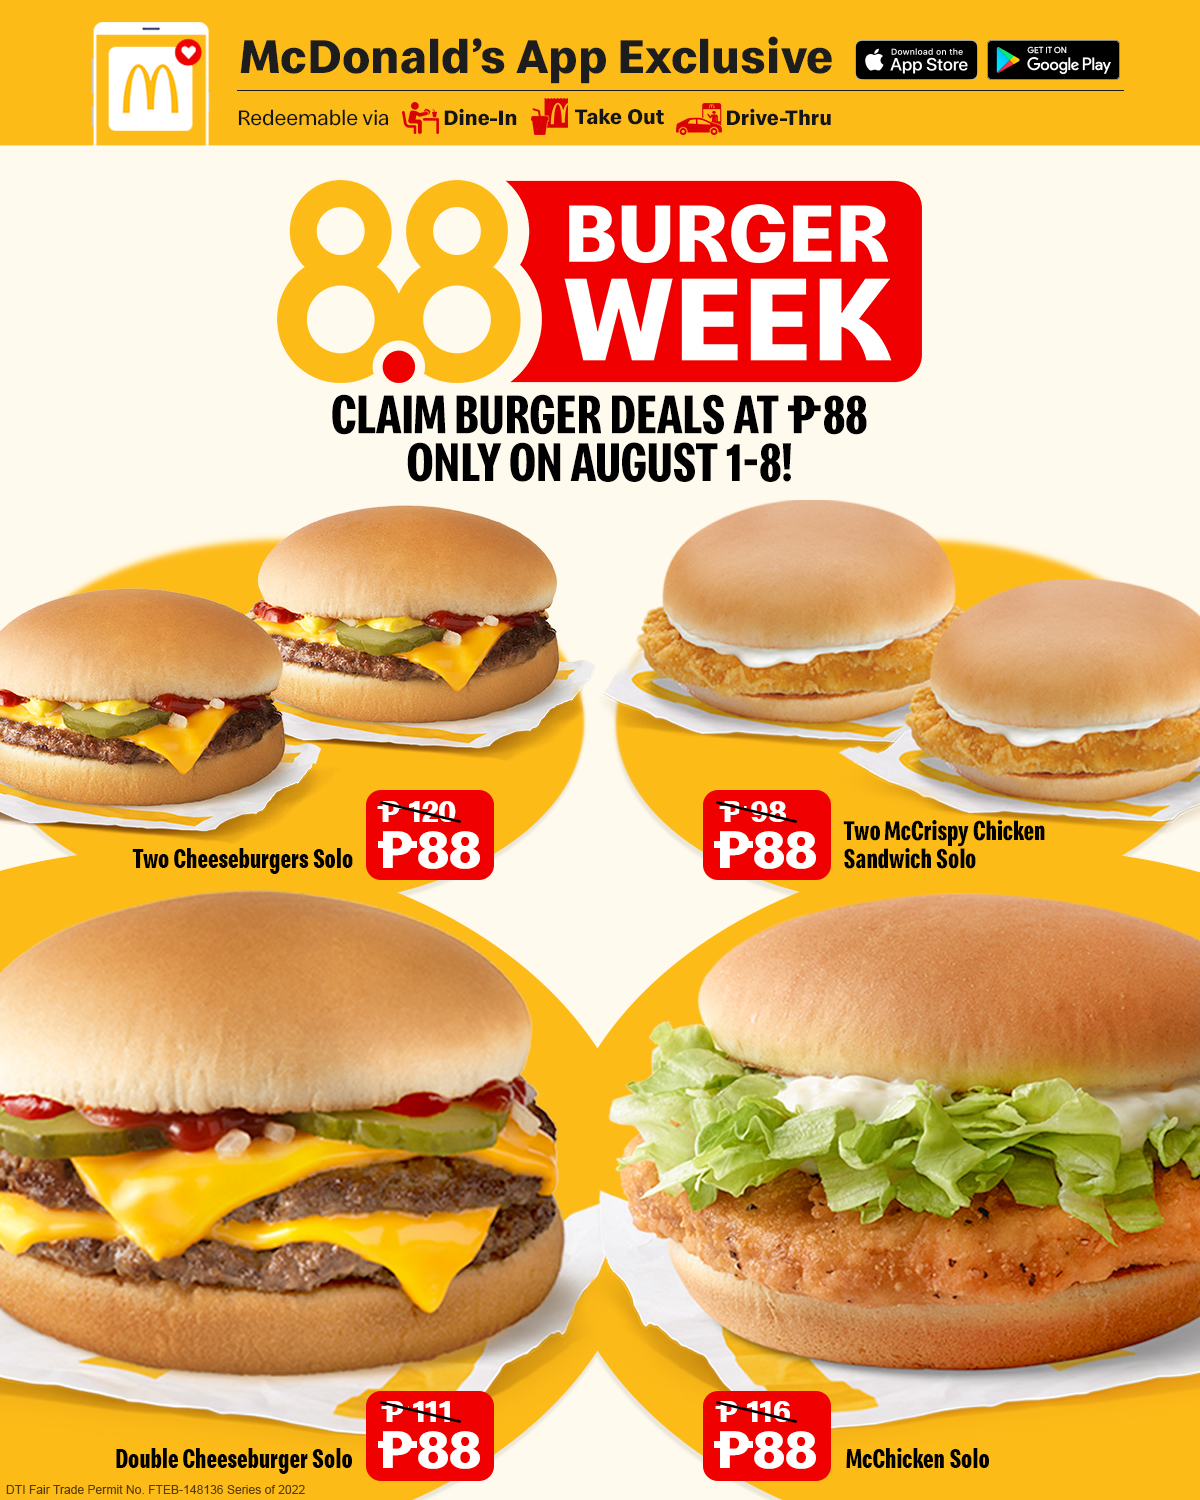 McDonald's Is Selling Double Cheeseburgers for 50 Cents